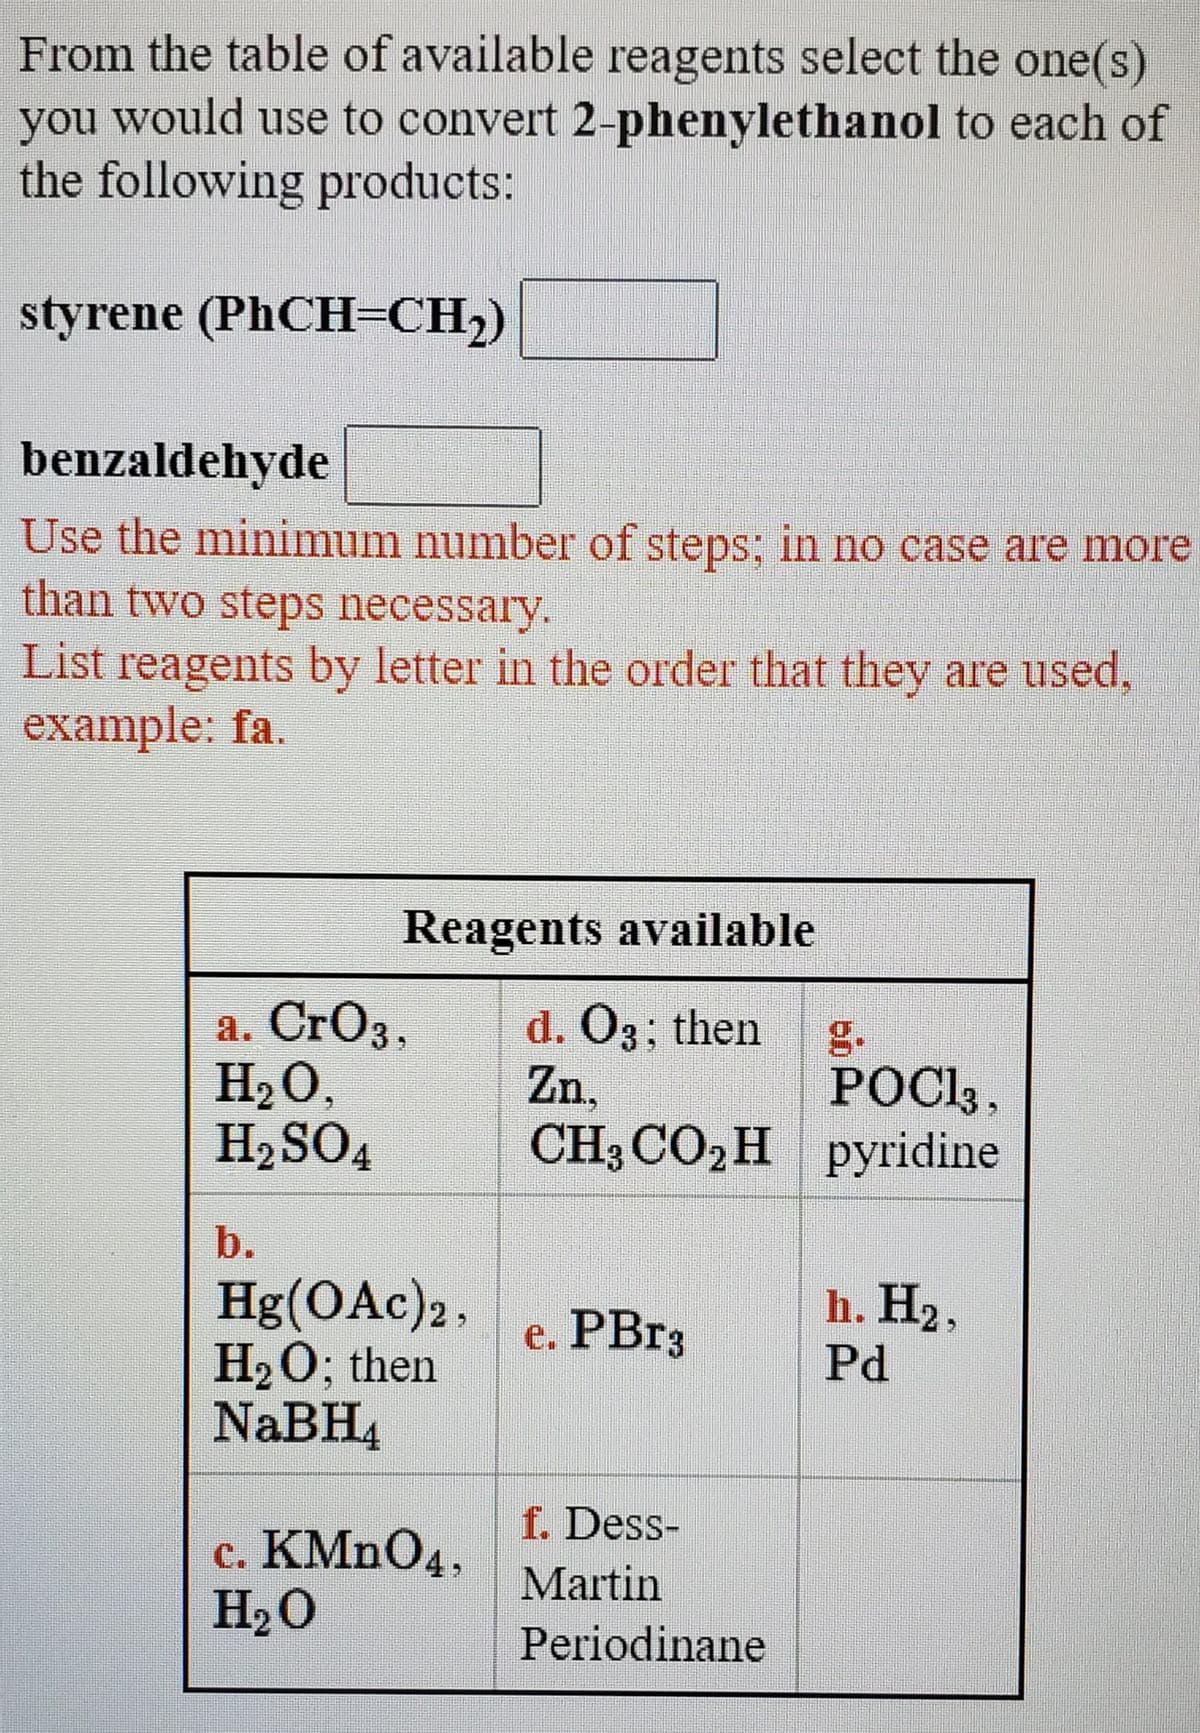 From the table of available reagents select the one(s)
you would use to convert 2-phenylethanol to each of
the following products:
styrene (PHCH=CH2)
benzaldehyde
Use the minimum number of steps; in no case are more
than two steps necessary.
List reagents by letter in the order that they are used,
example: fa.
Reagents available
a. CrO3,
H2O,
H2SO4
d. O3; then
g.
POC13 ,
CH3CO2Н ругidine
Zn,
b.
Hg(OAc)2,
H2O; then
NABH4
h. H2,
e. PB%3
Pd
f. Dess-
c. KMNO4,
H2O
Martin
Periodinane
